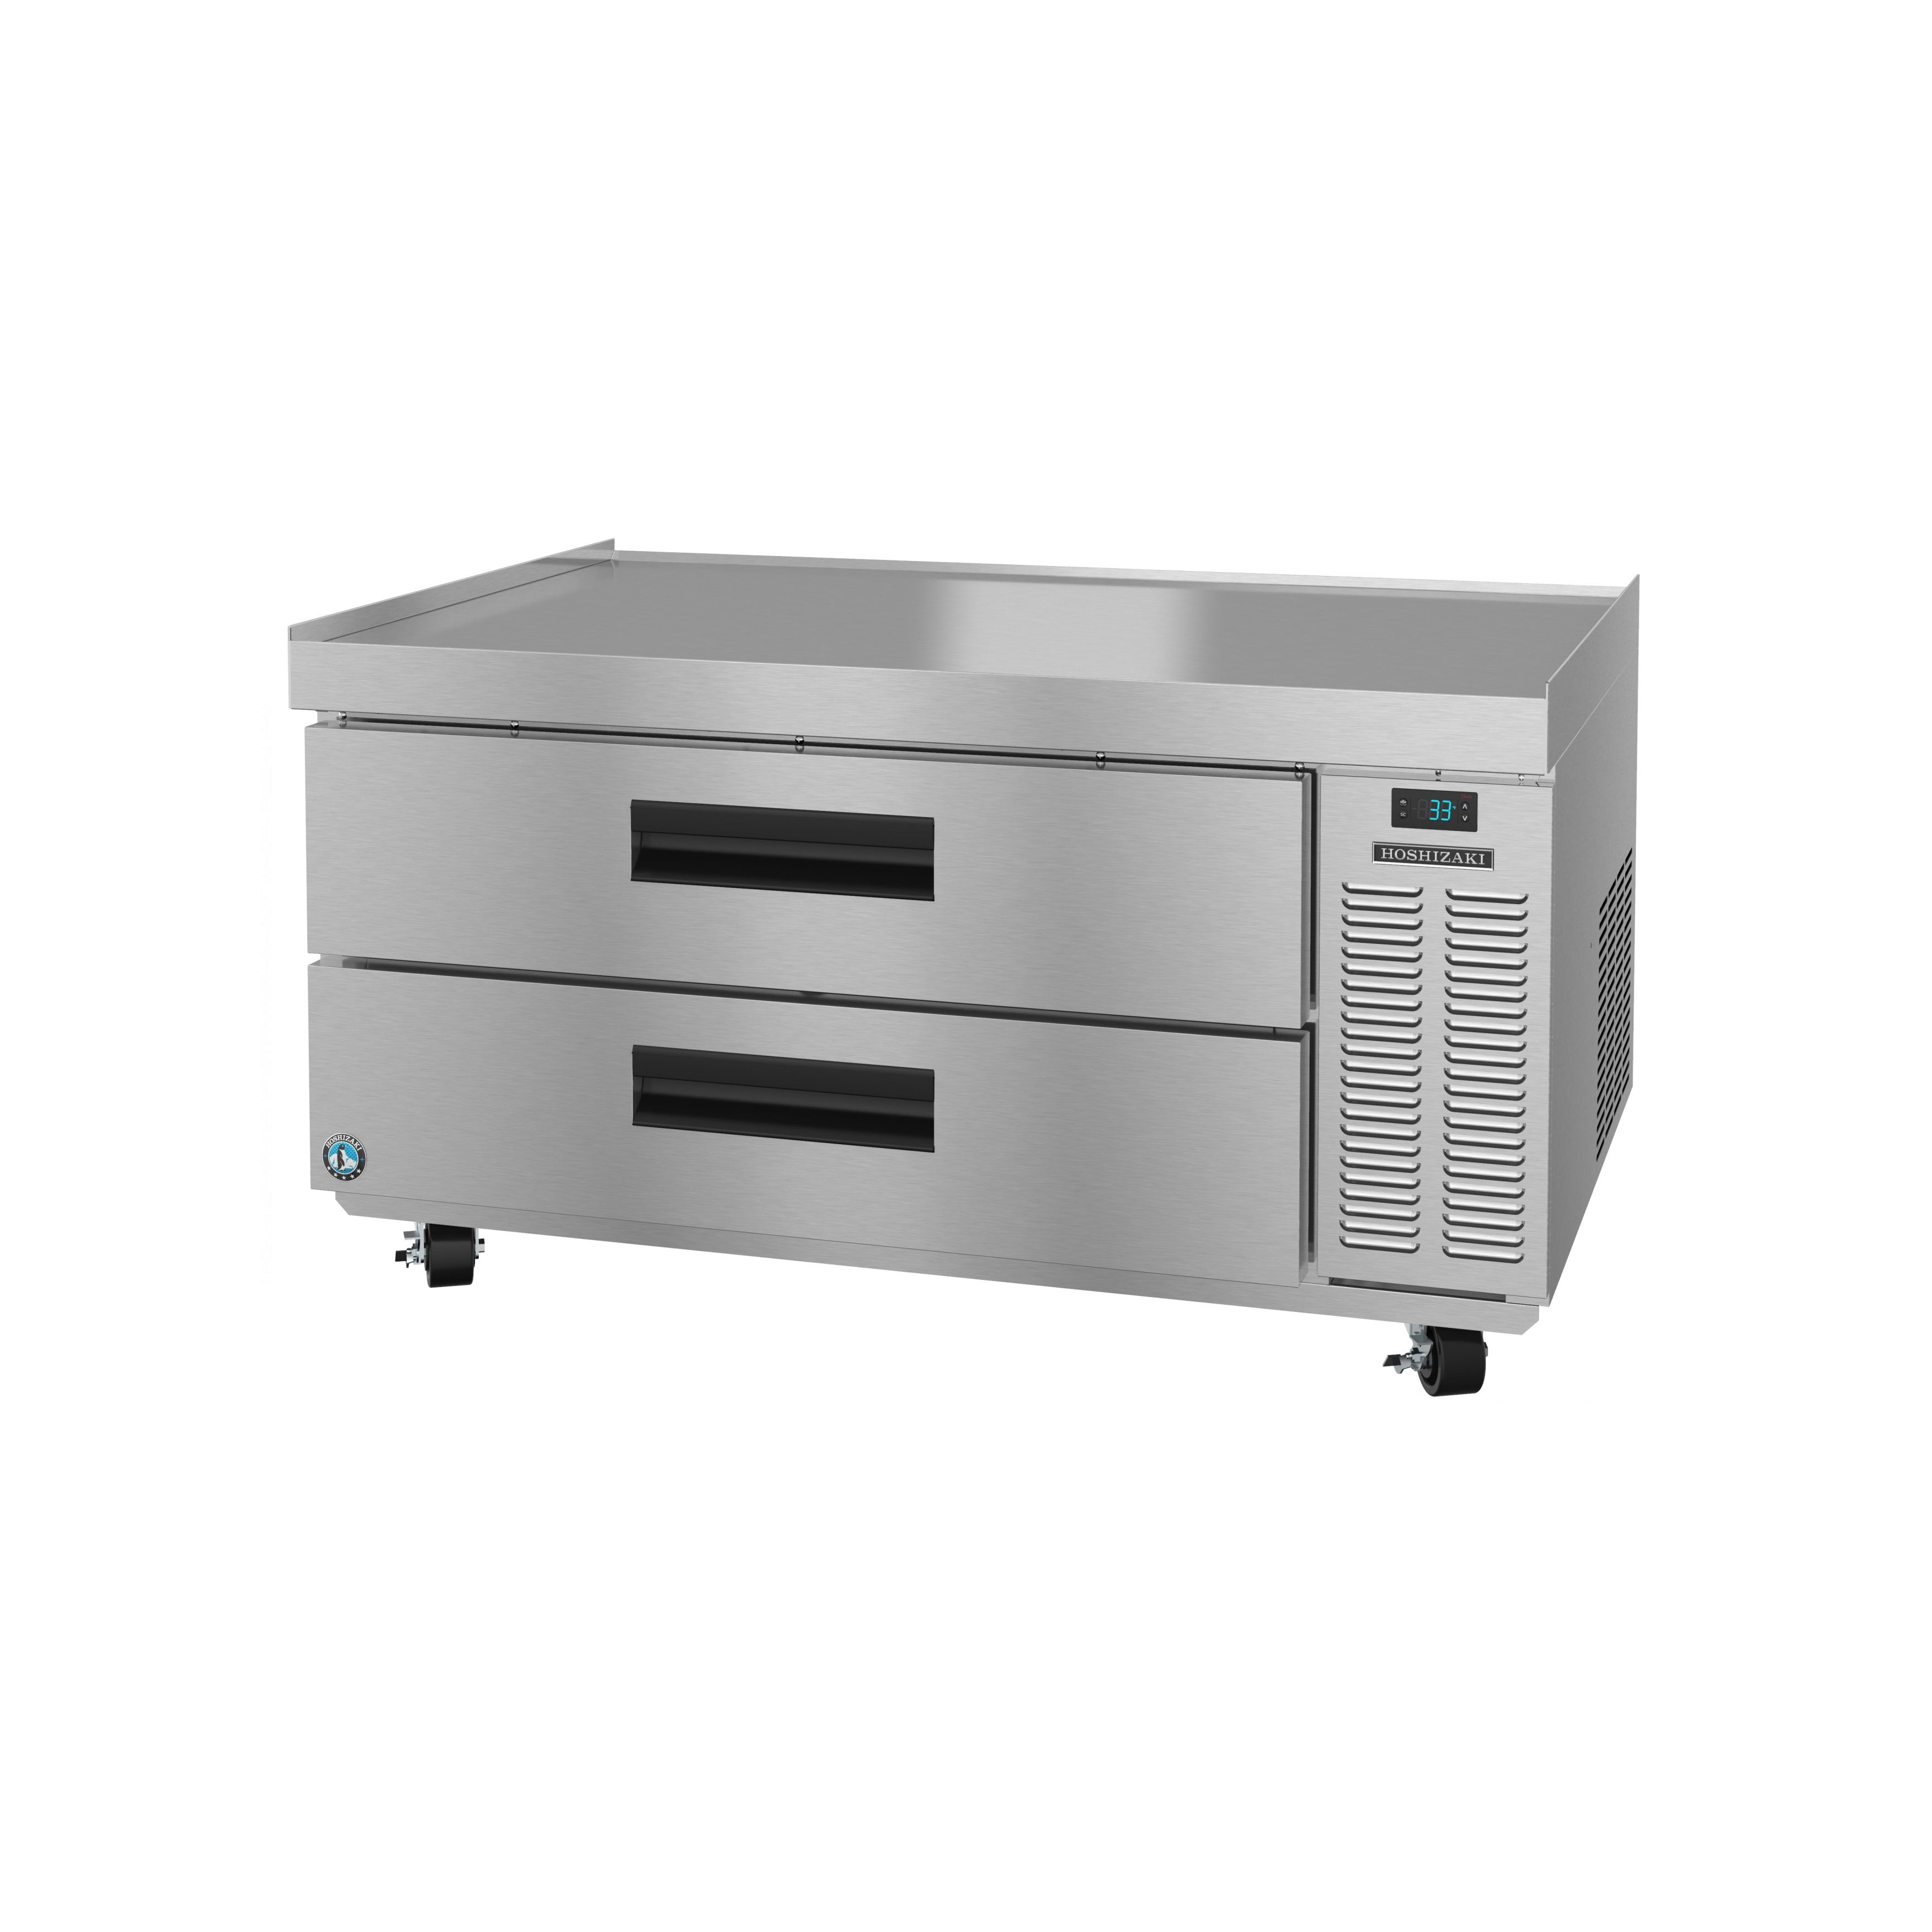 Hoshizaki - CR49A, Commercial 49" 2 Drawer Refrigerated Chef Base 10.6 cu. ft.